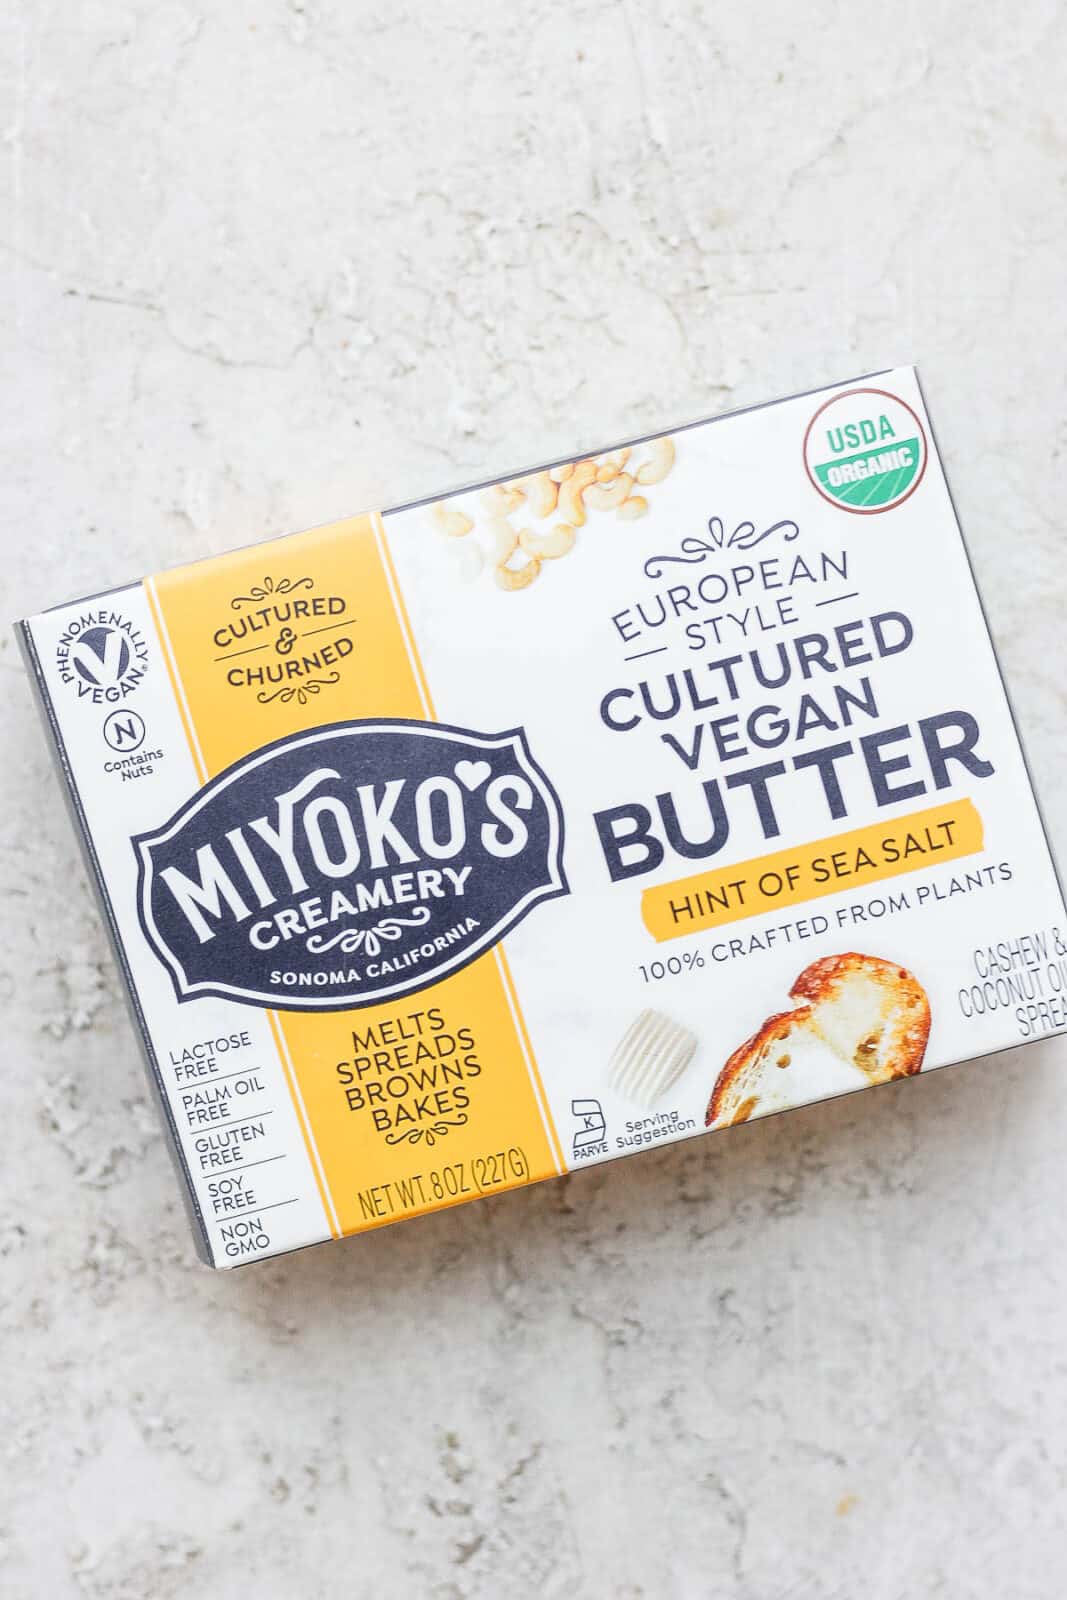 A box of Miyoko's plant butter.